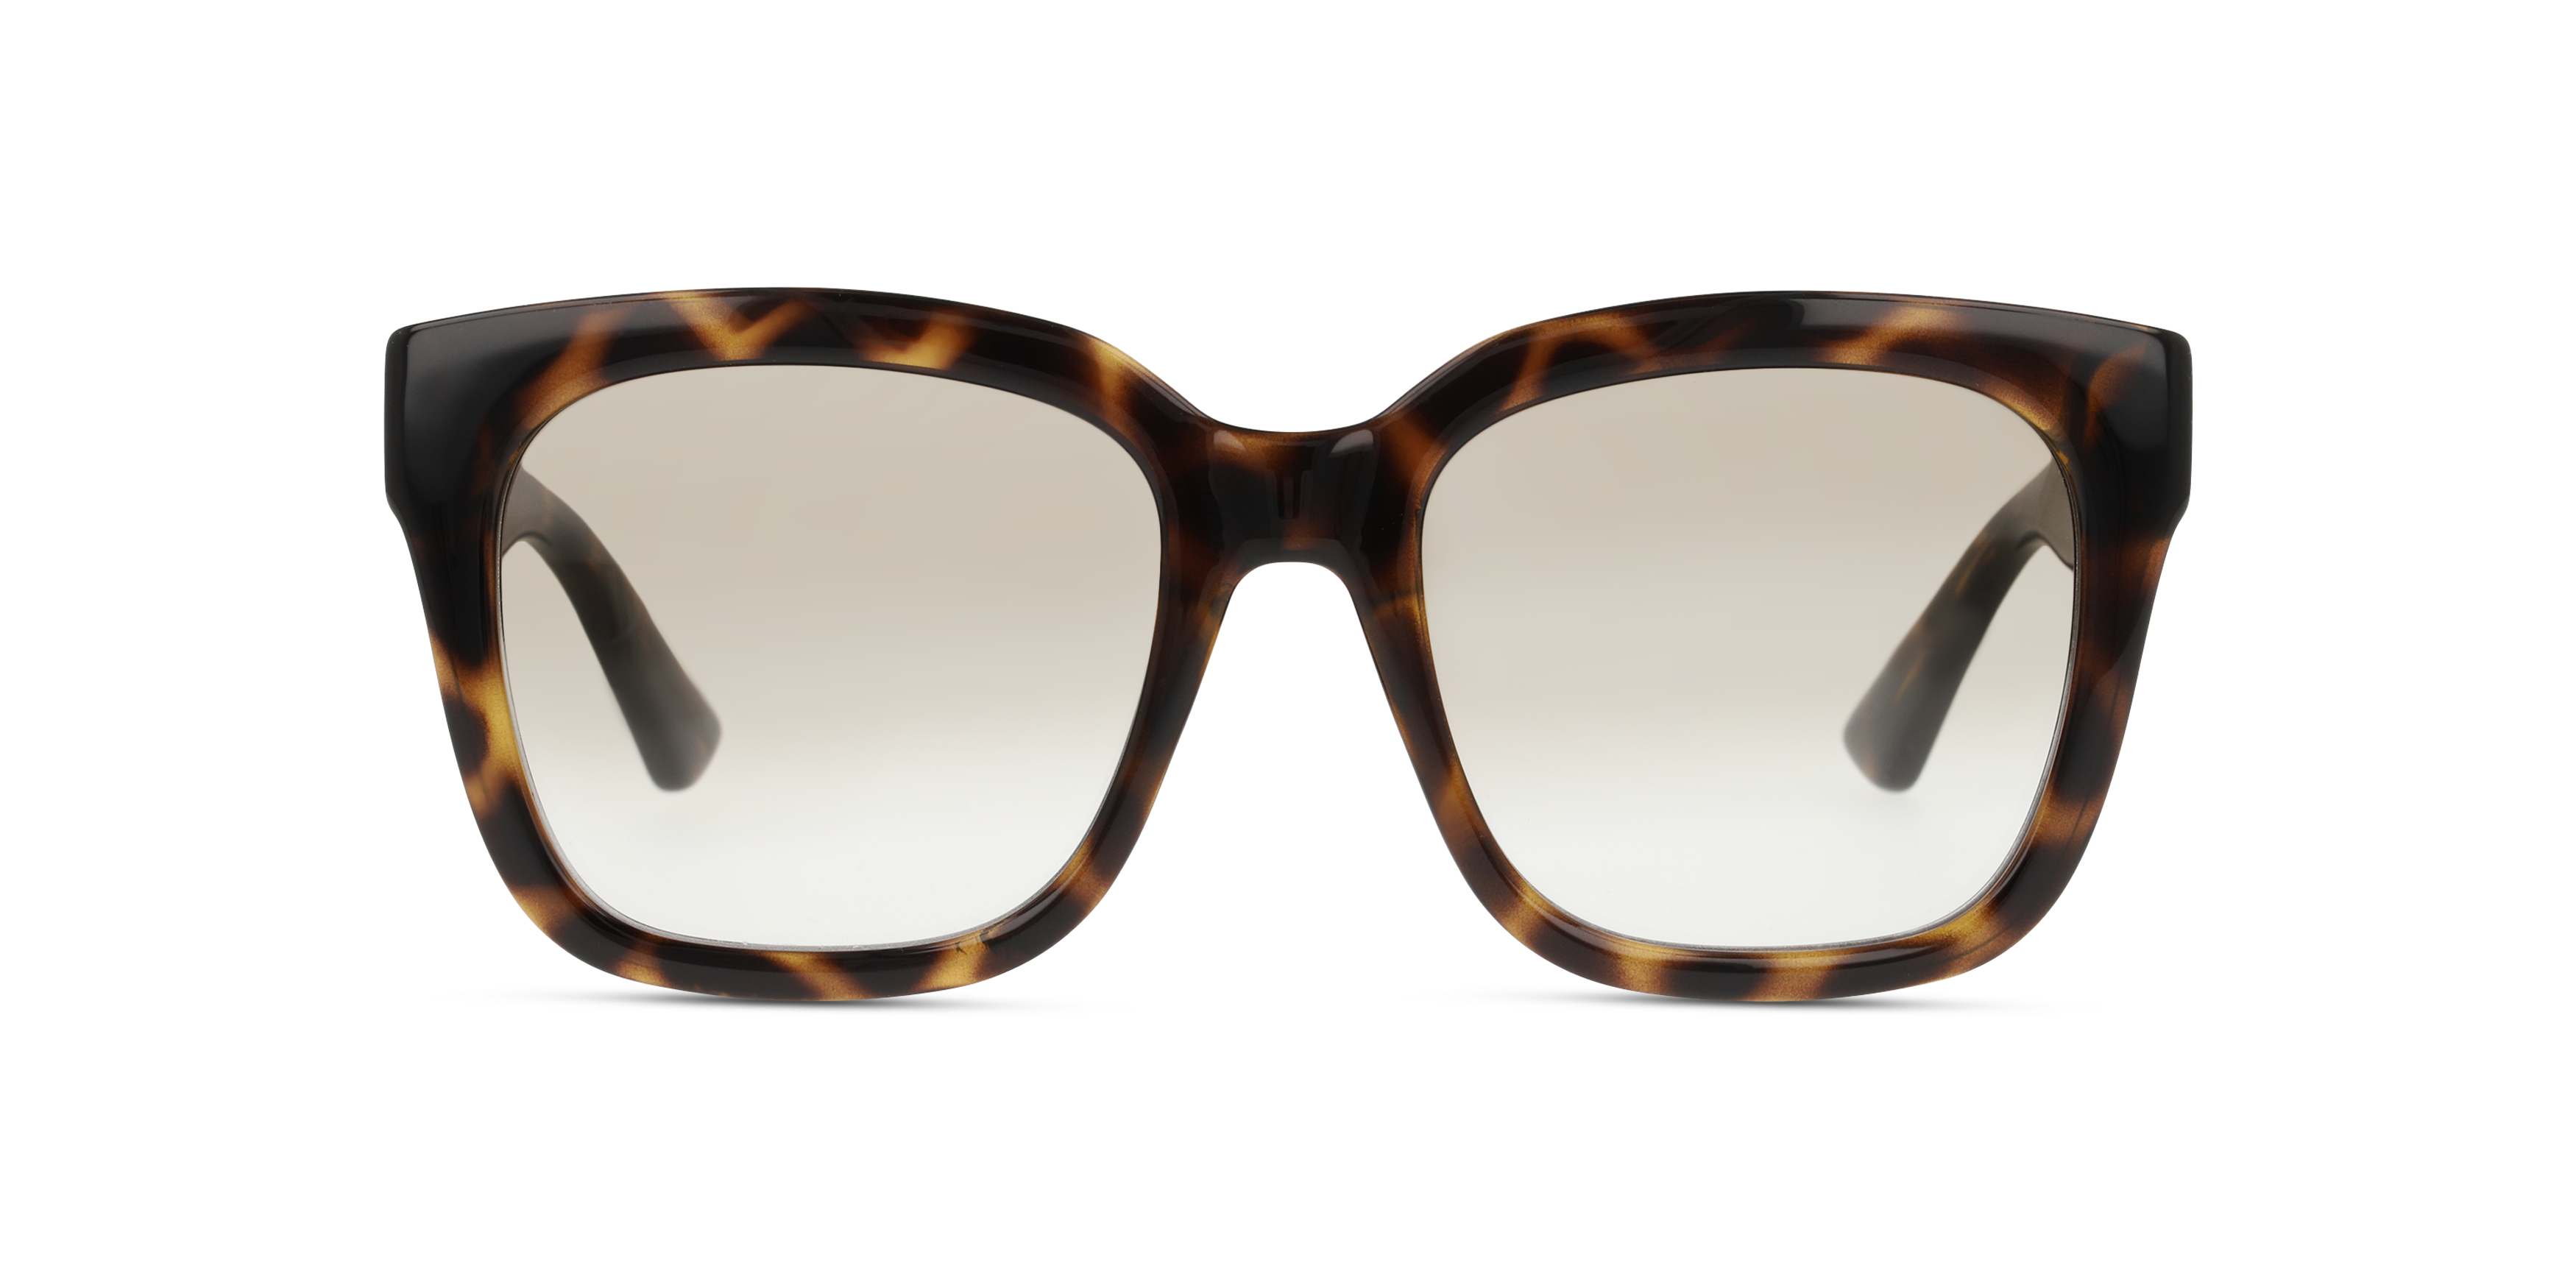 [products.image.front] Gucci GG 1338S Sunglasses